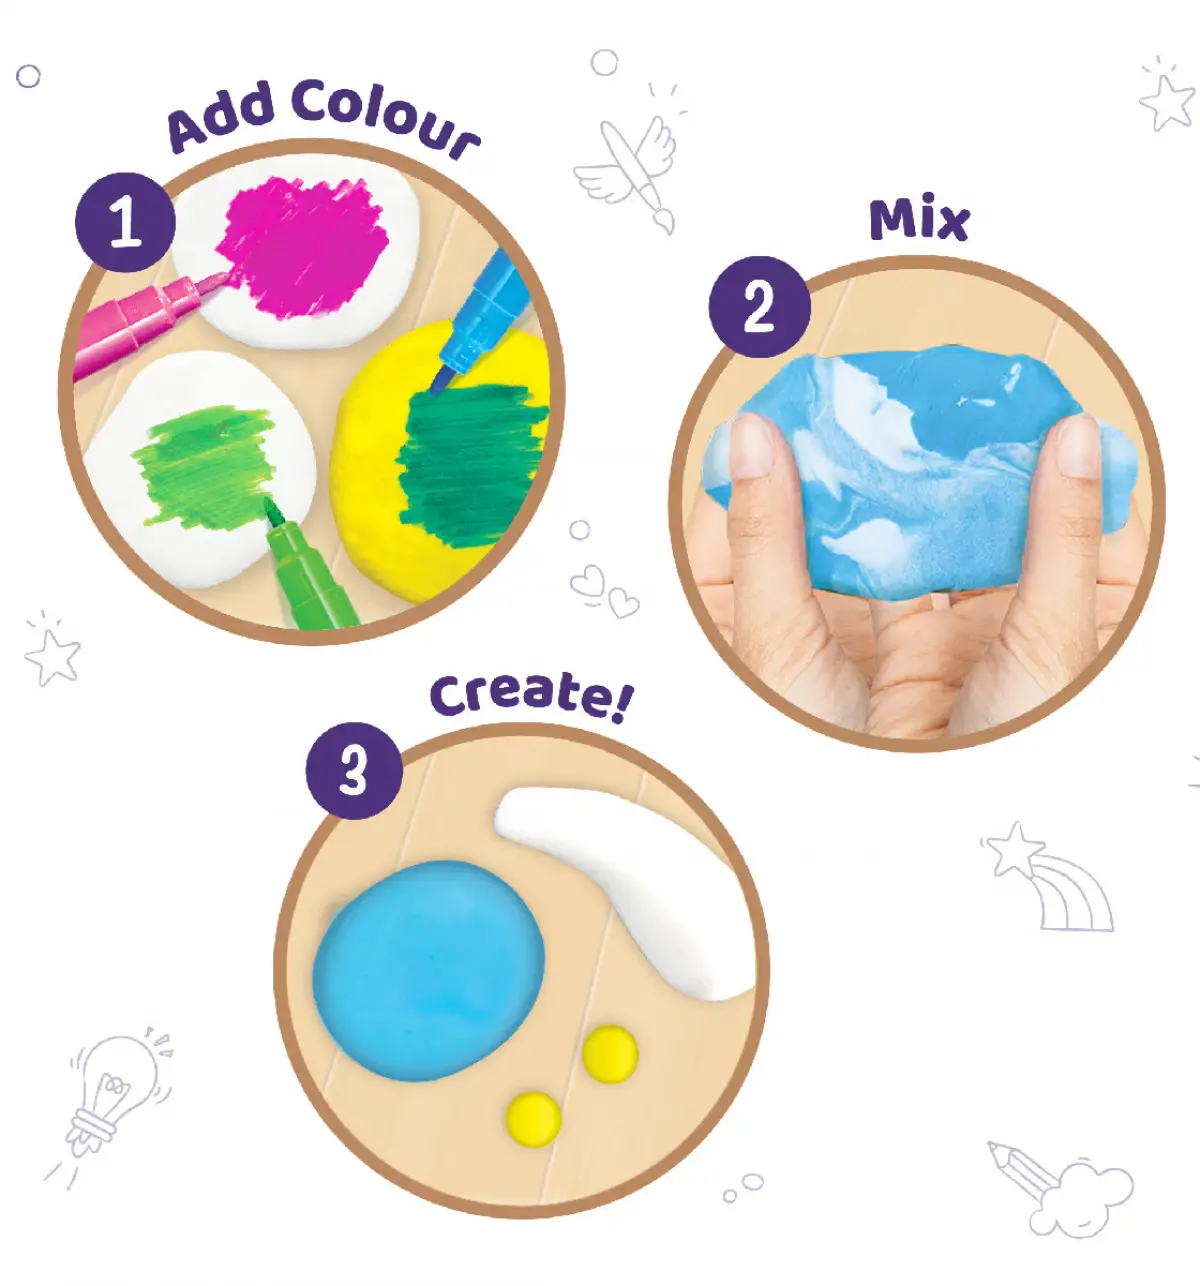 Imagimake Magic Clay Colour & Create Space Craft Kit, Air Dry Clay for Art & Craft, Make 10 Super Clay Creations, Kids for 5Y+, Multicolour